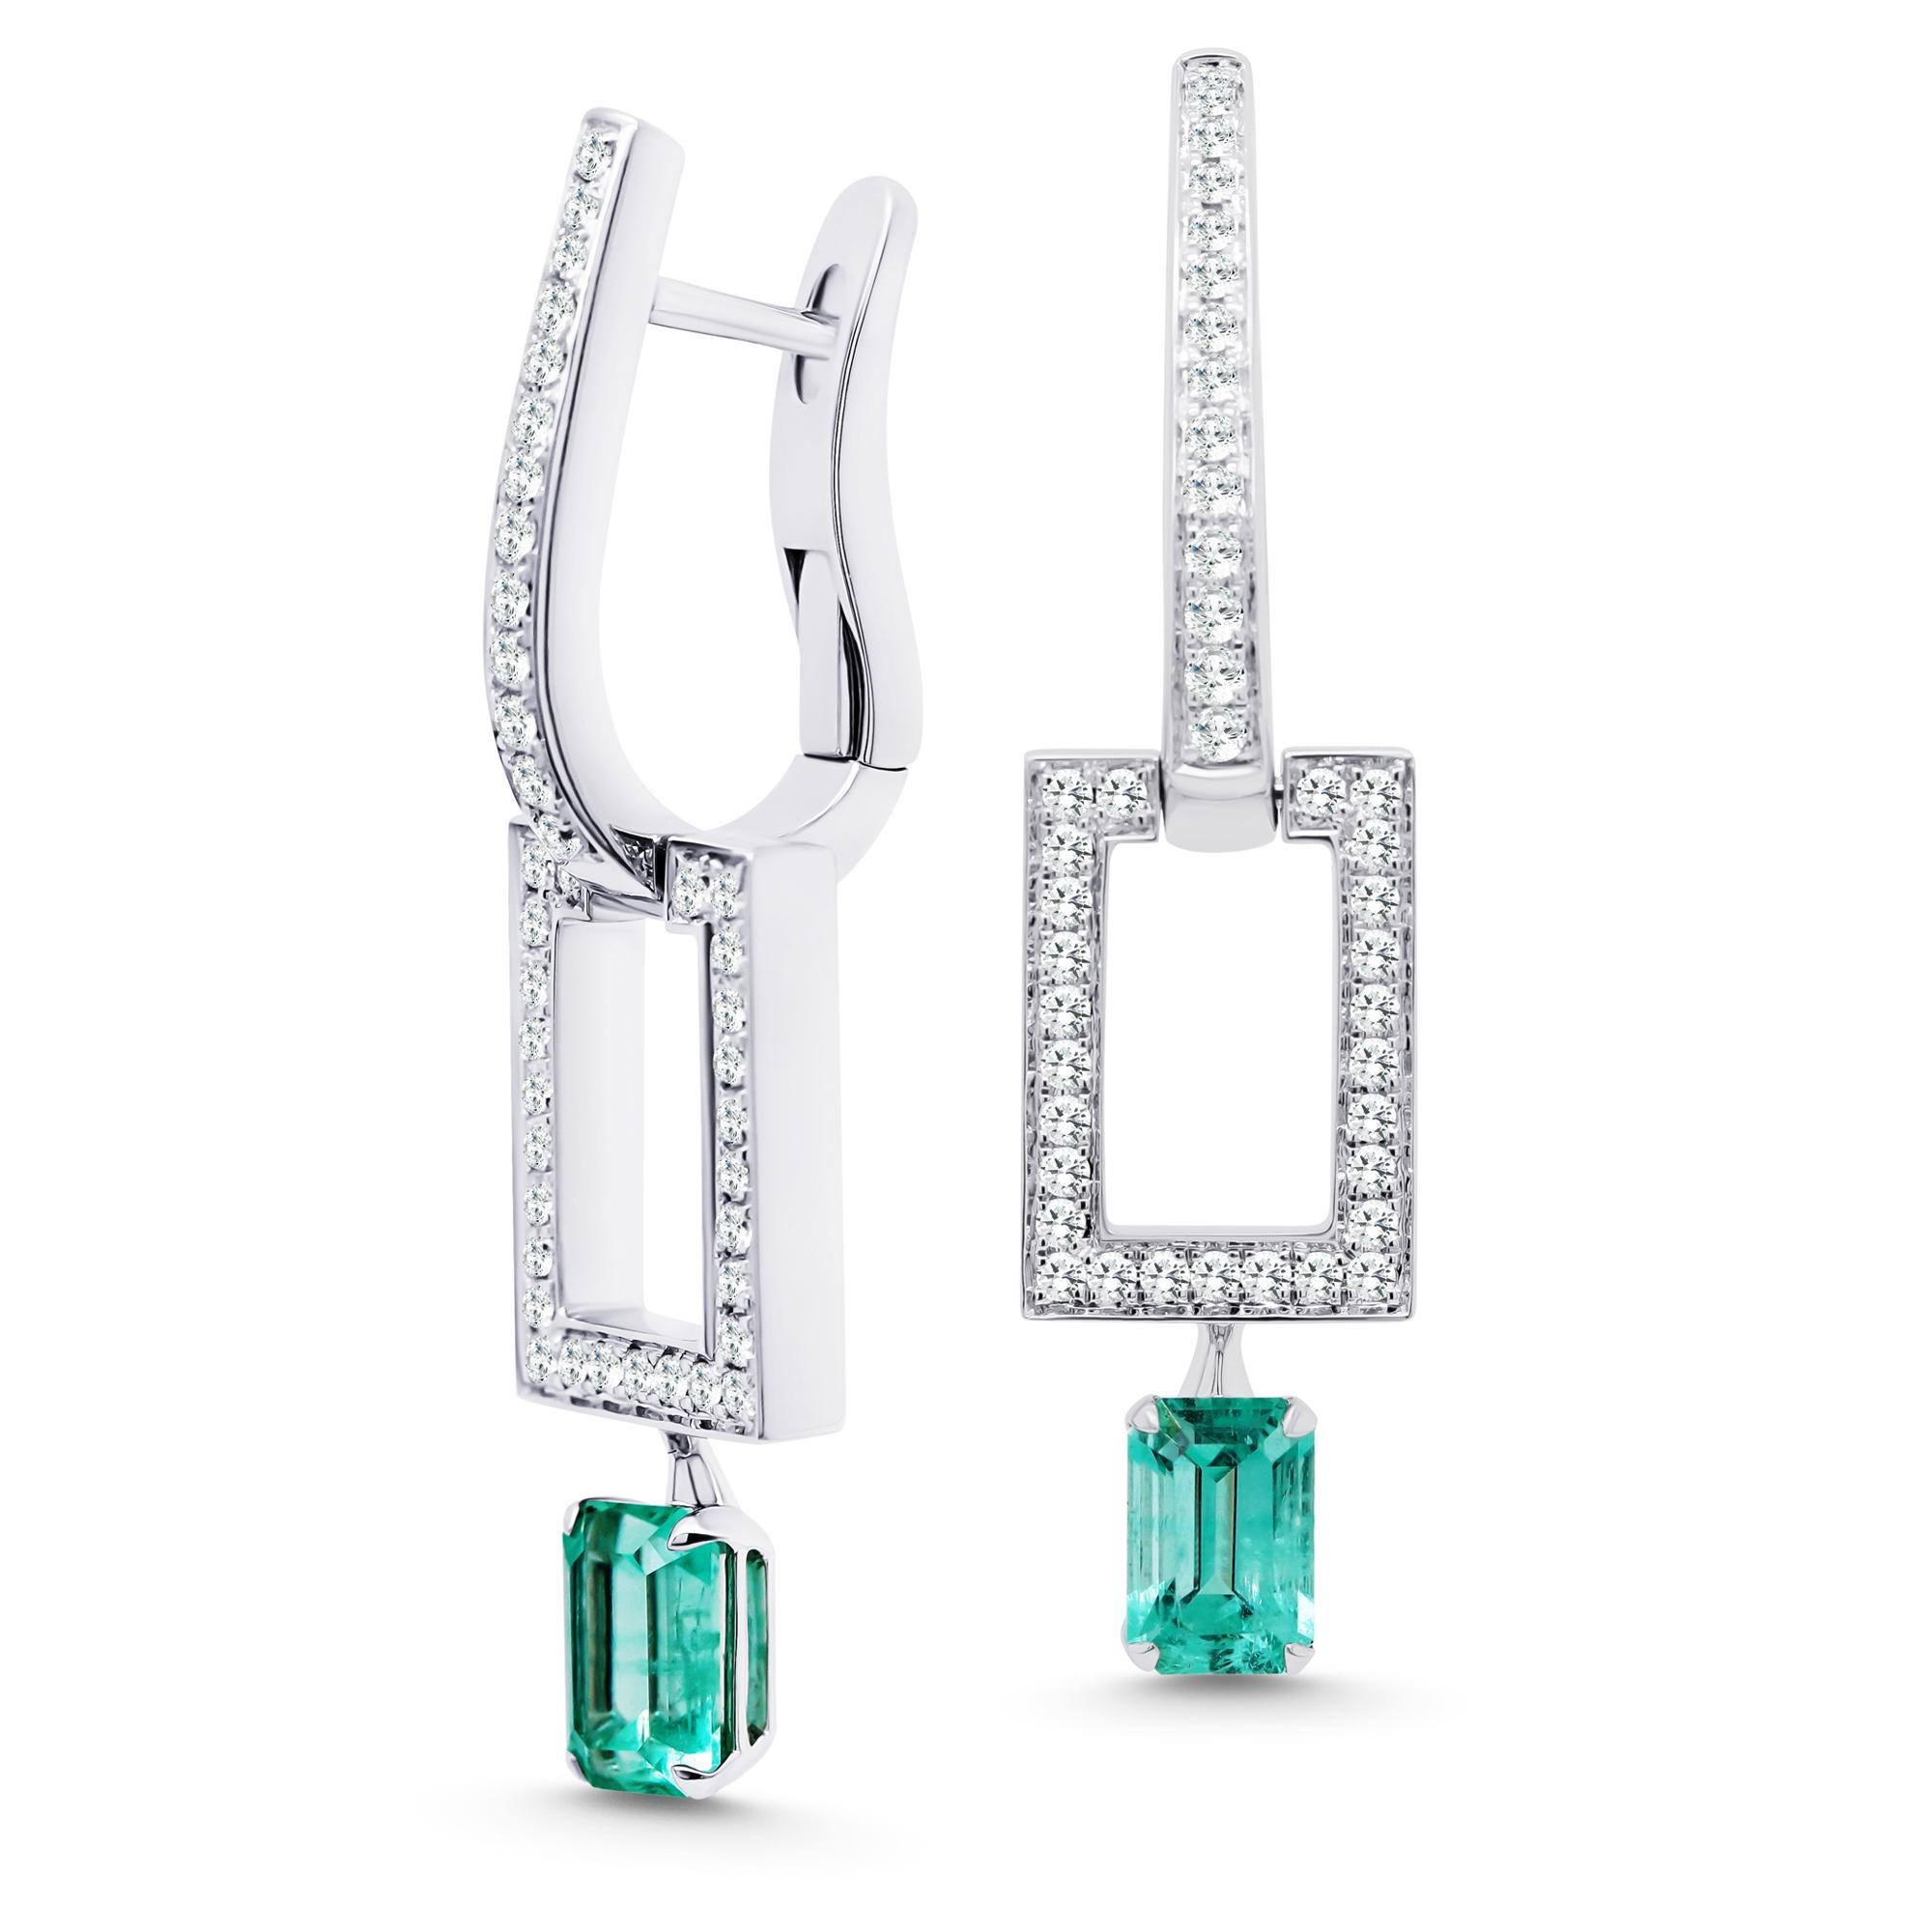 Real elegance is hidden in the details. Exquisite earrings with Emerald will help to emphasize it favorably and complete the look.
A beautifully matched pair of 0.6ct each Russian Emeralds surrounded delicately of Diamonds in a piece of timeless